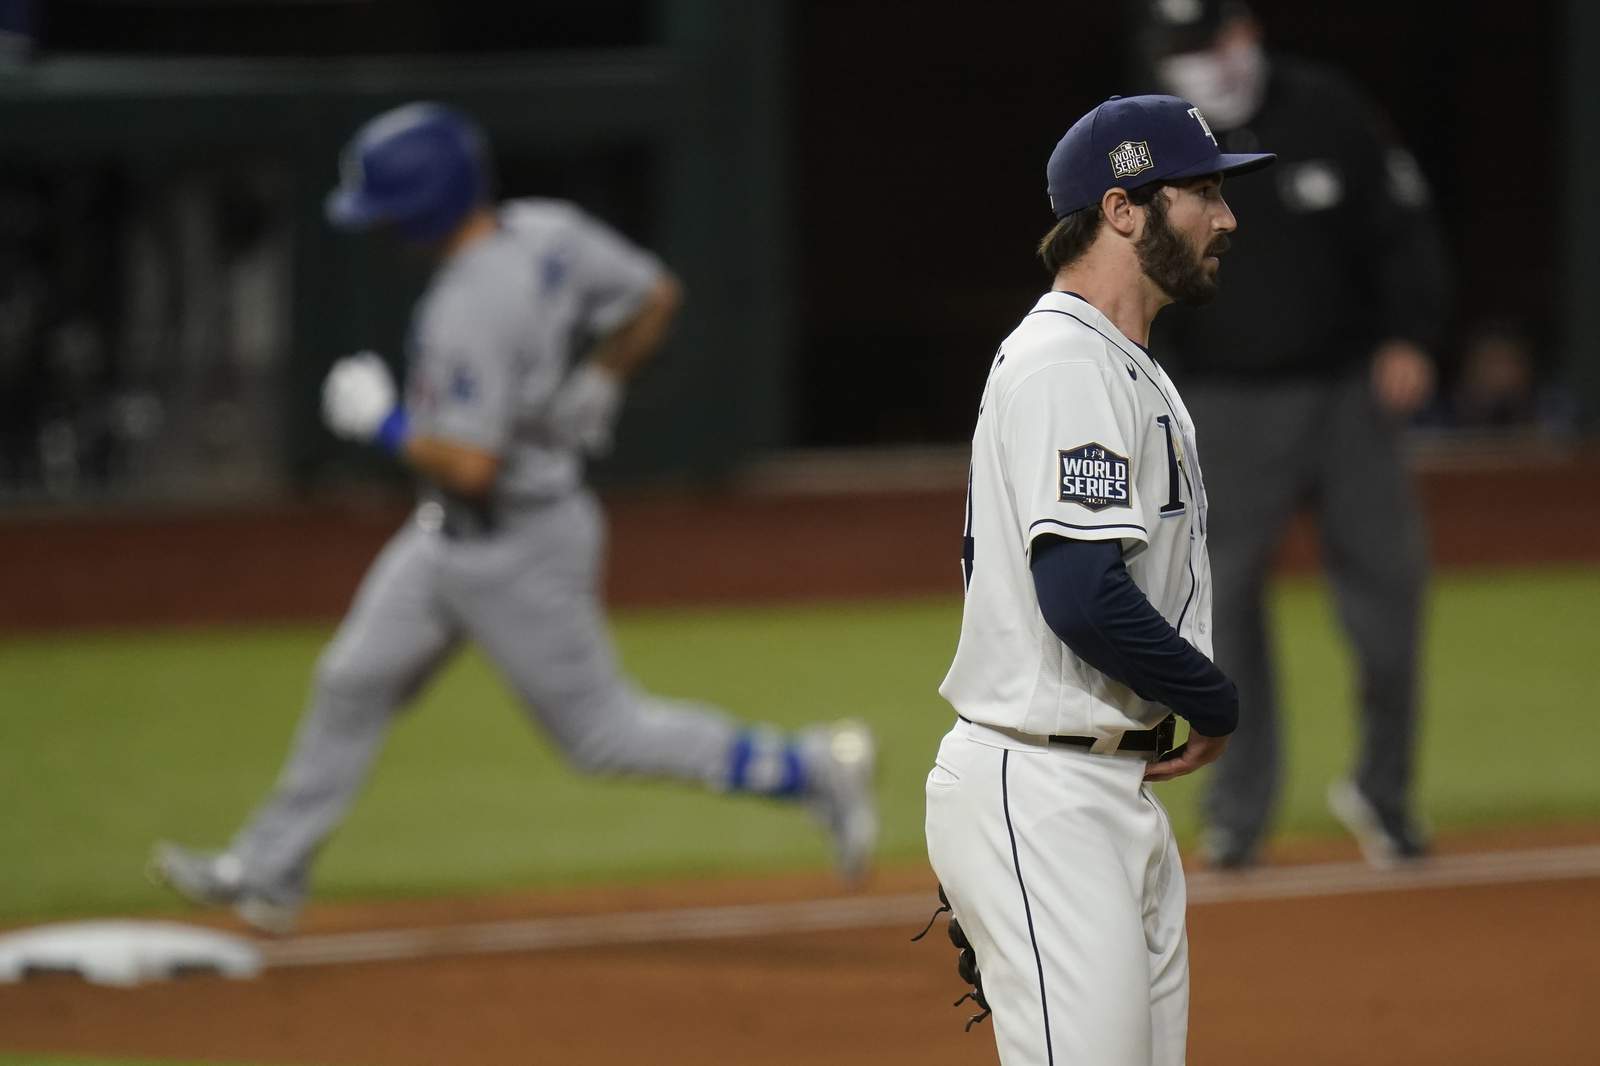 The Latest: LA enters 9th up 6-1 behind Buehler’s dominance